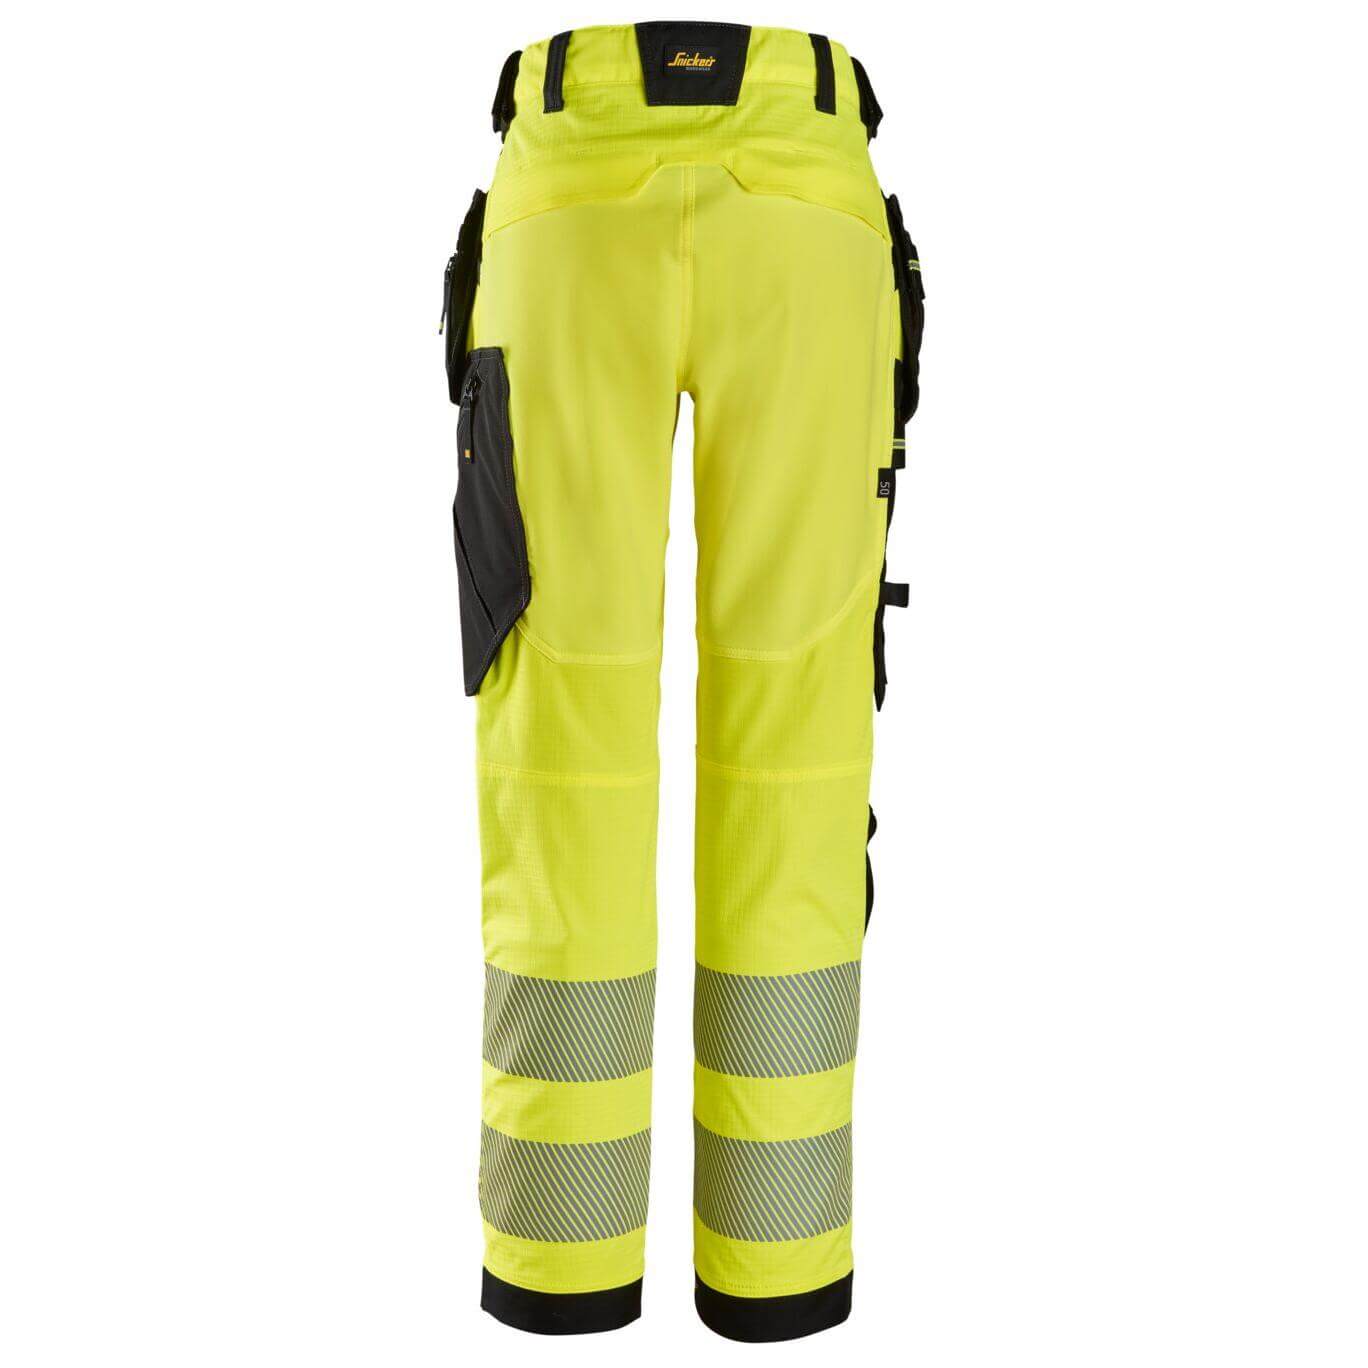 Snickers 6943 Hi Vis Slim Fit Stretch Trousers with Holster Pockets Class 2 Hi Vis Yellow Black back #colour_hi-vis-yellow-black